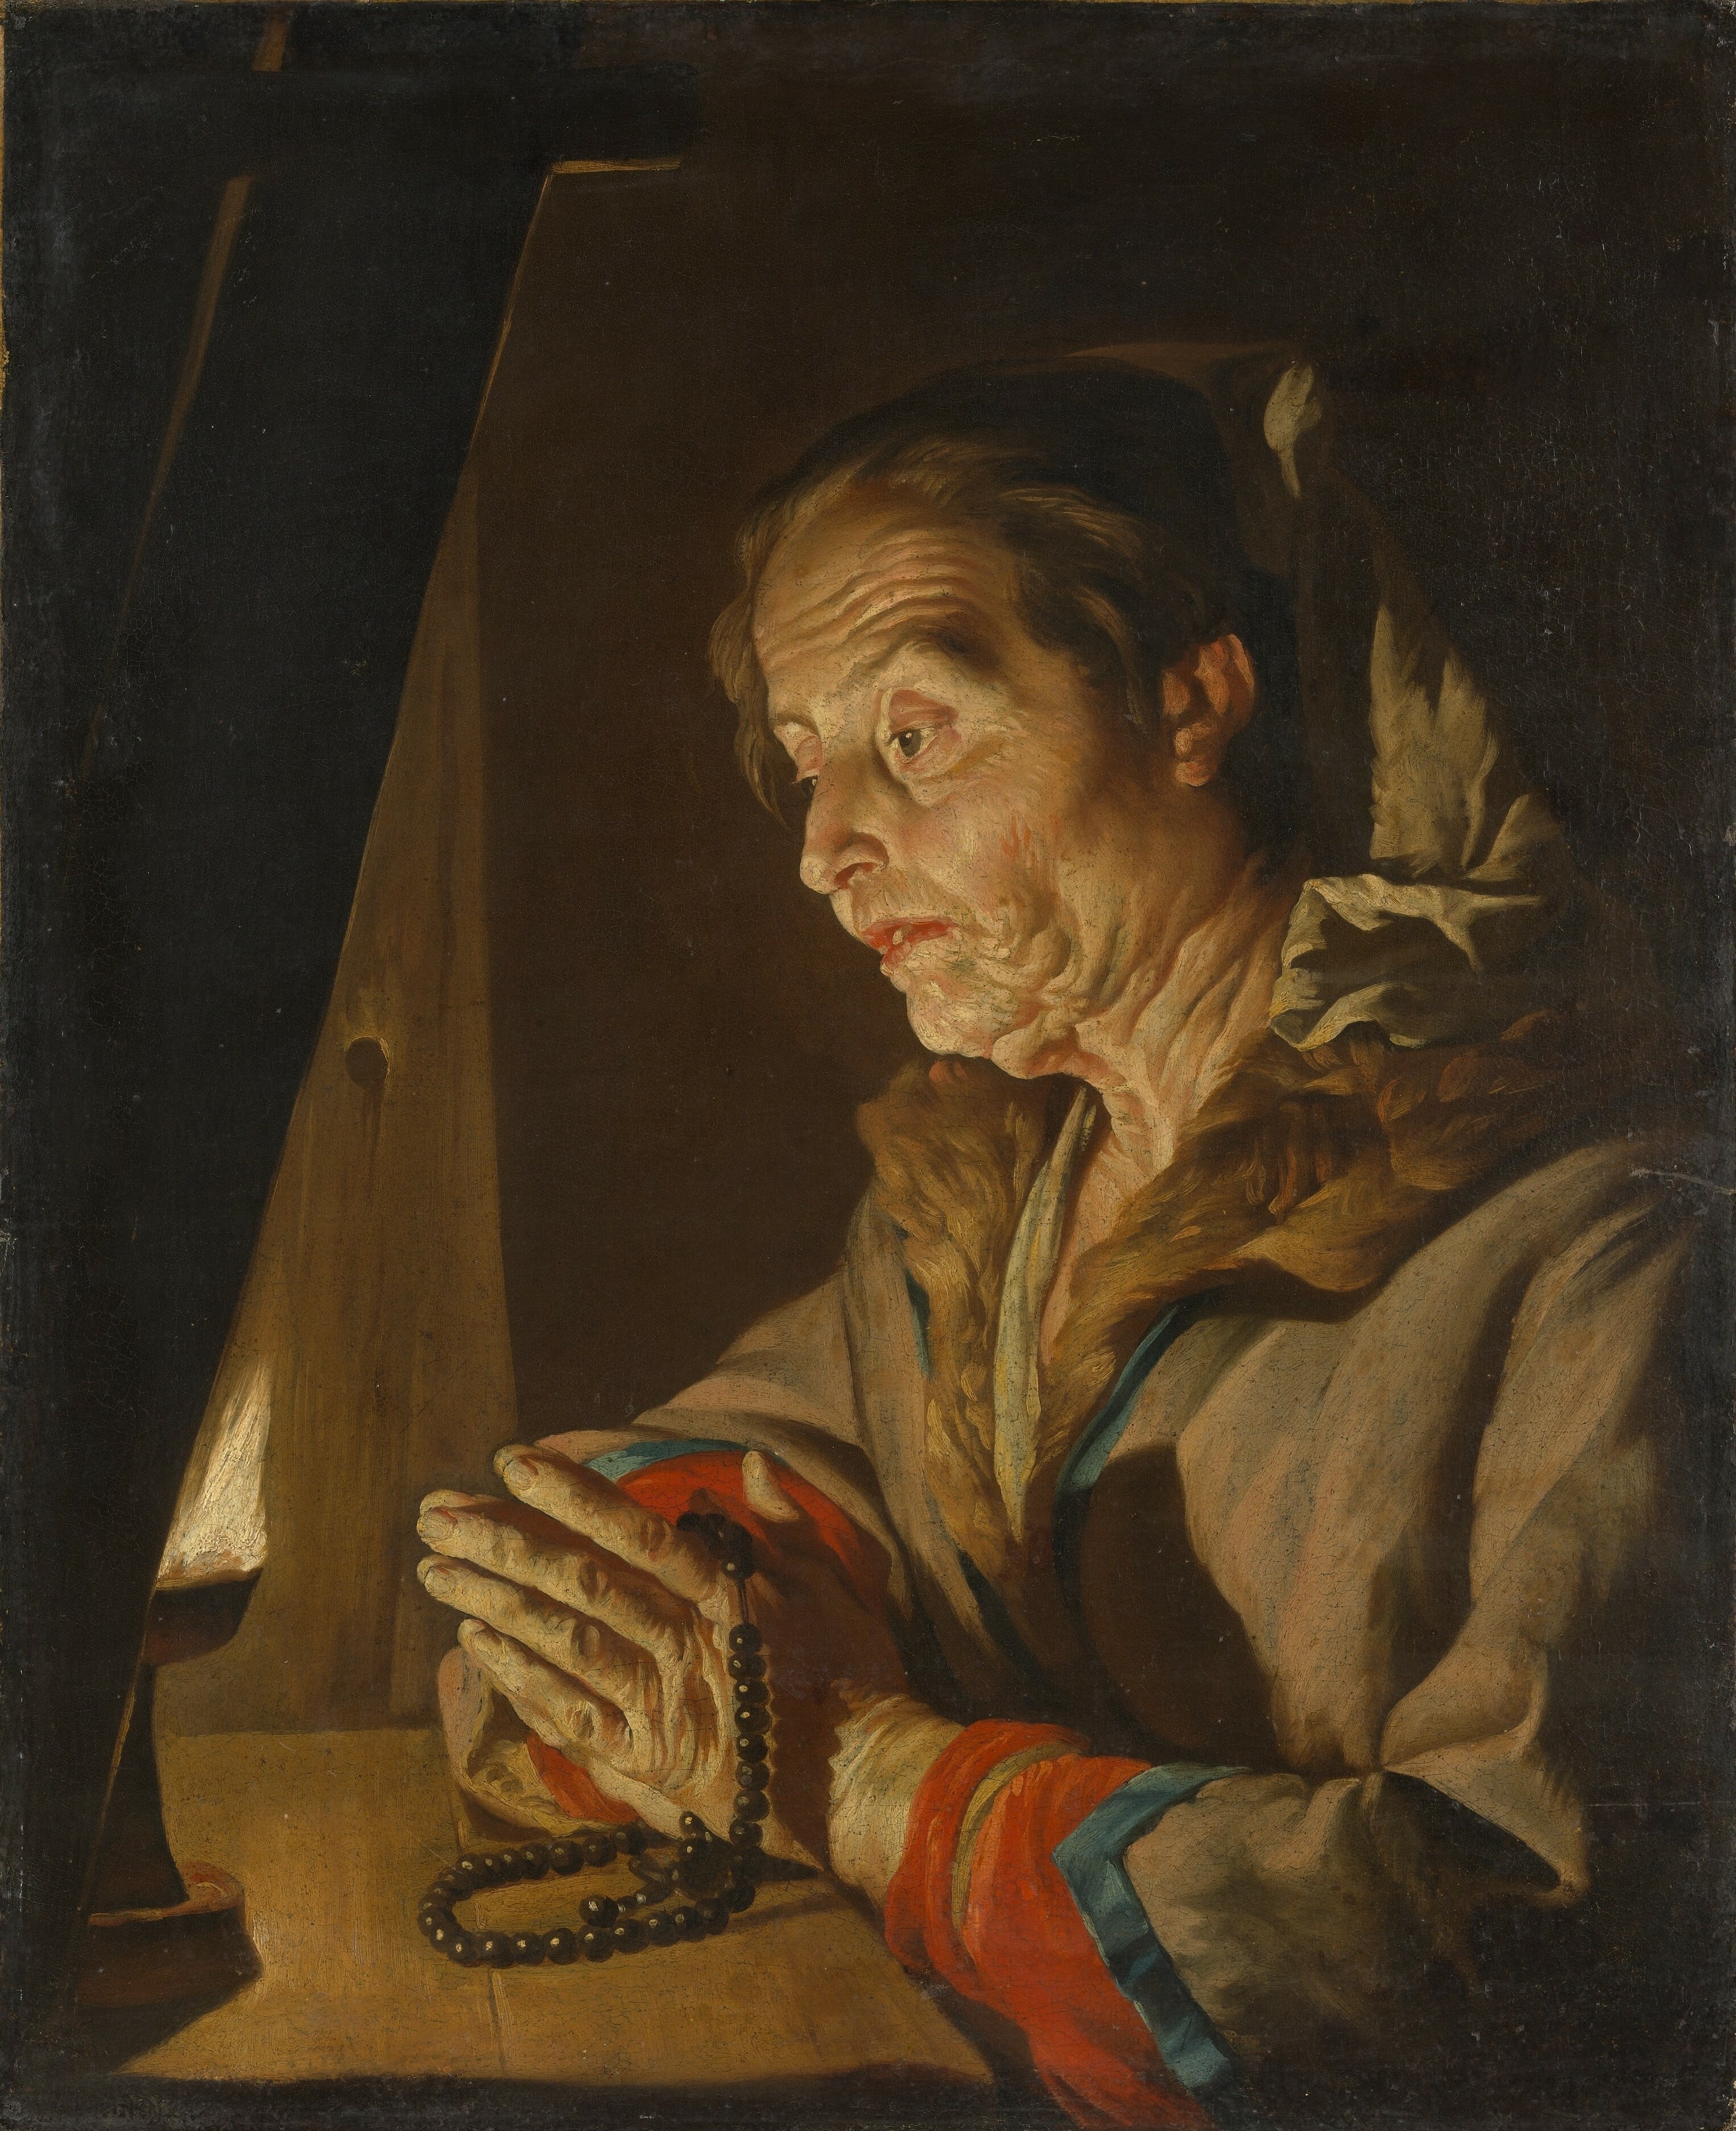 Old Woman Praying-Beautiful Paintings by Matthias Stom (1600-1652) - A Baroque painter